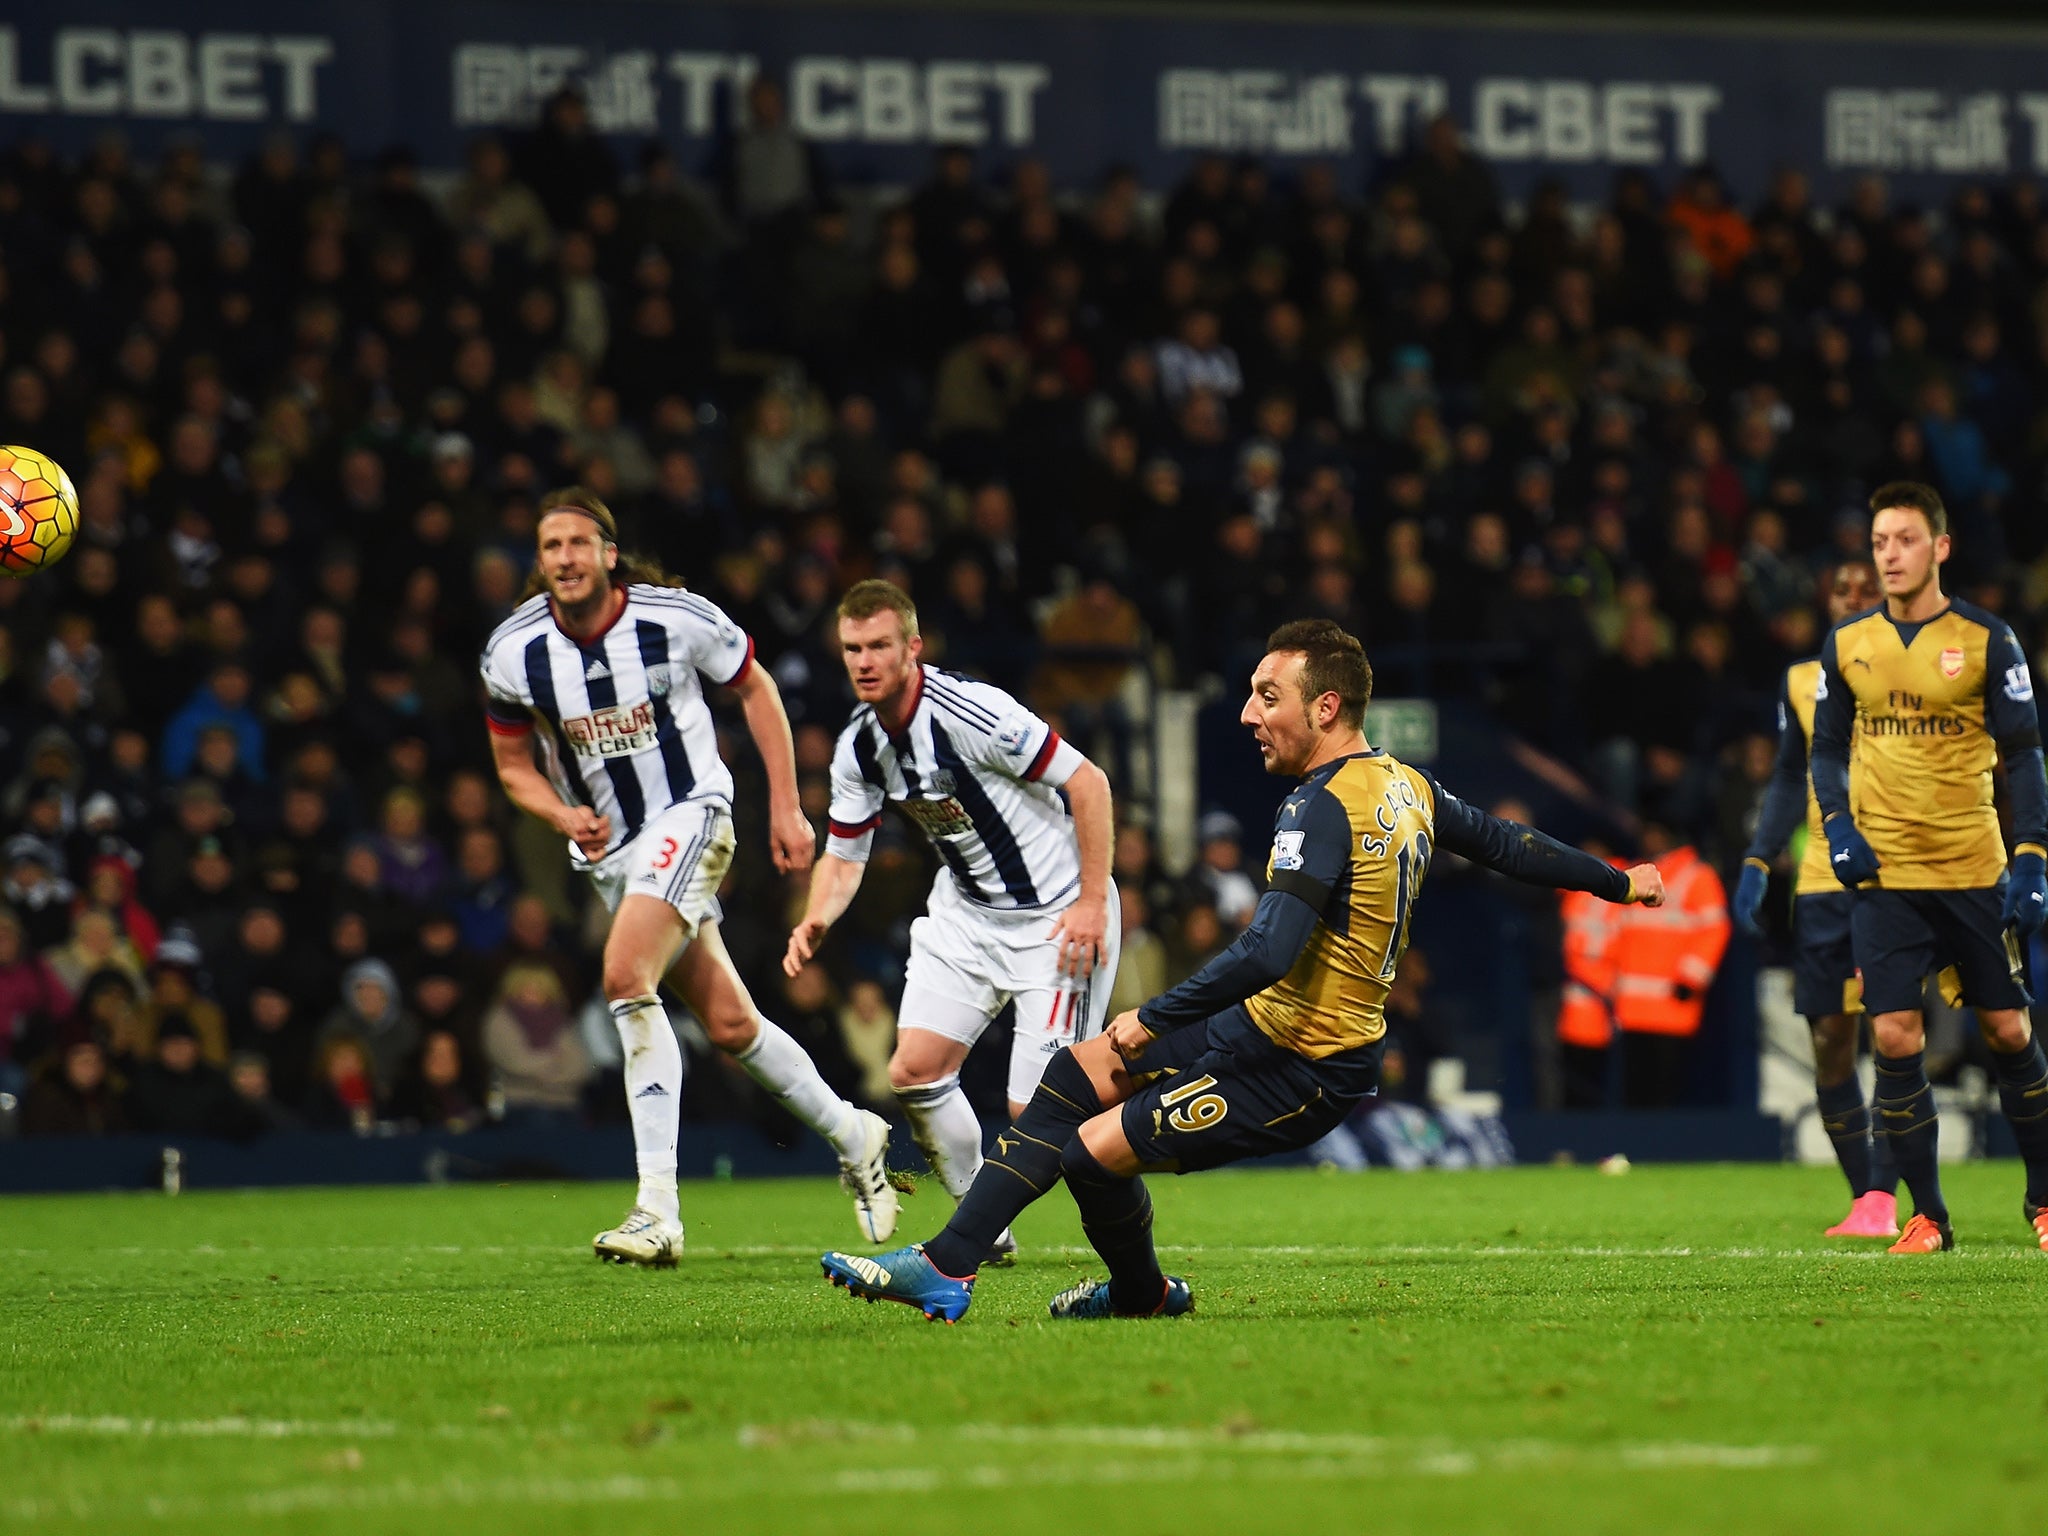 Santi Cazorla slips up while taking the penalty against West Brom